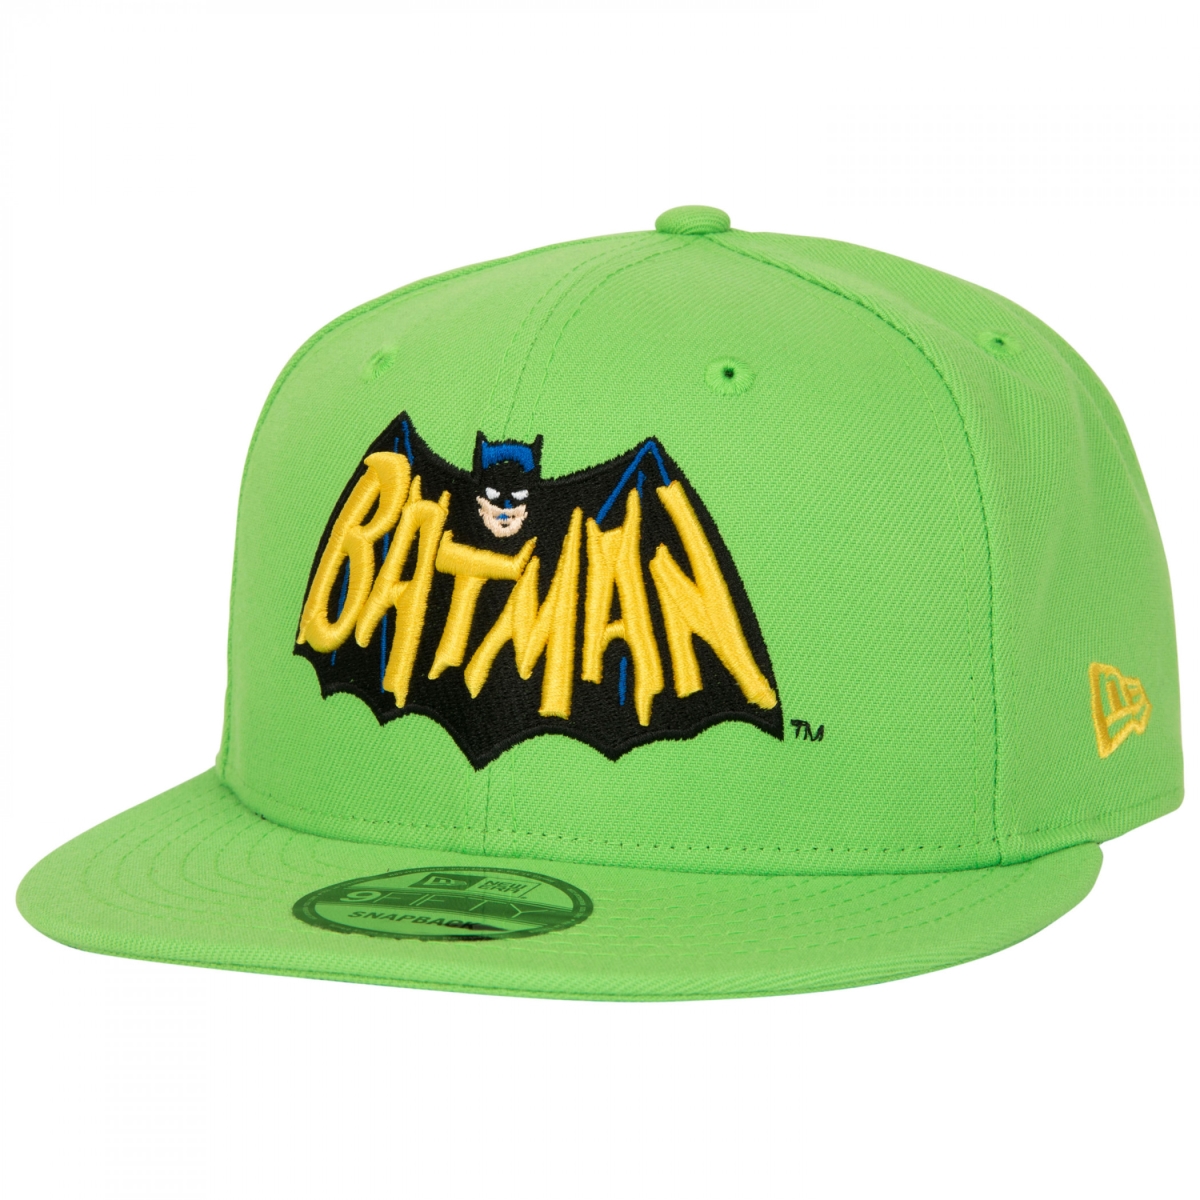 Picture of Batman 858225 1960S Colorway New Era 9Fifty Adjustable Hat - Lime Green - One Size